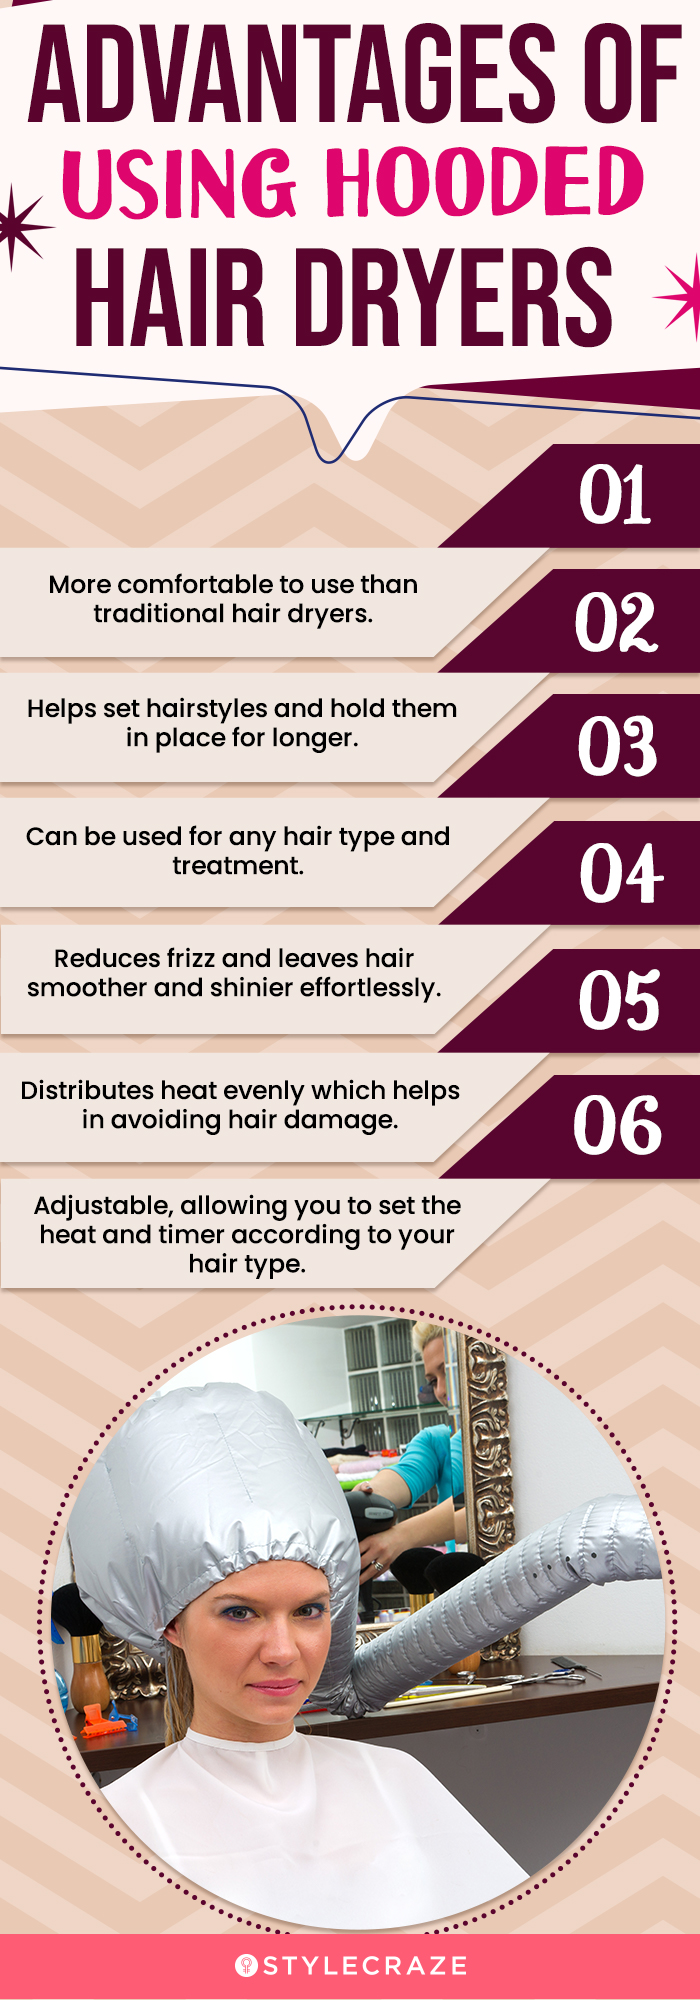 Advantages Of Using Hooded Hair Dryers (infographic)